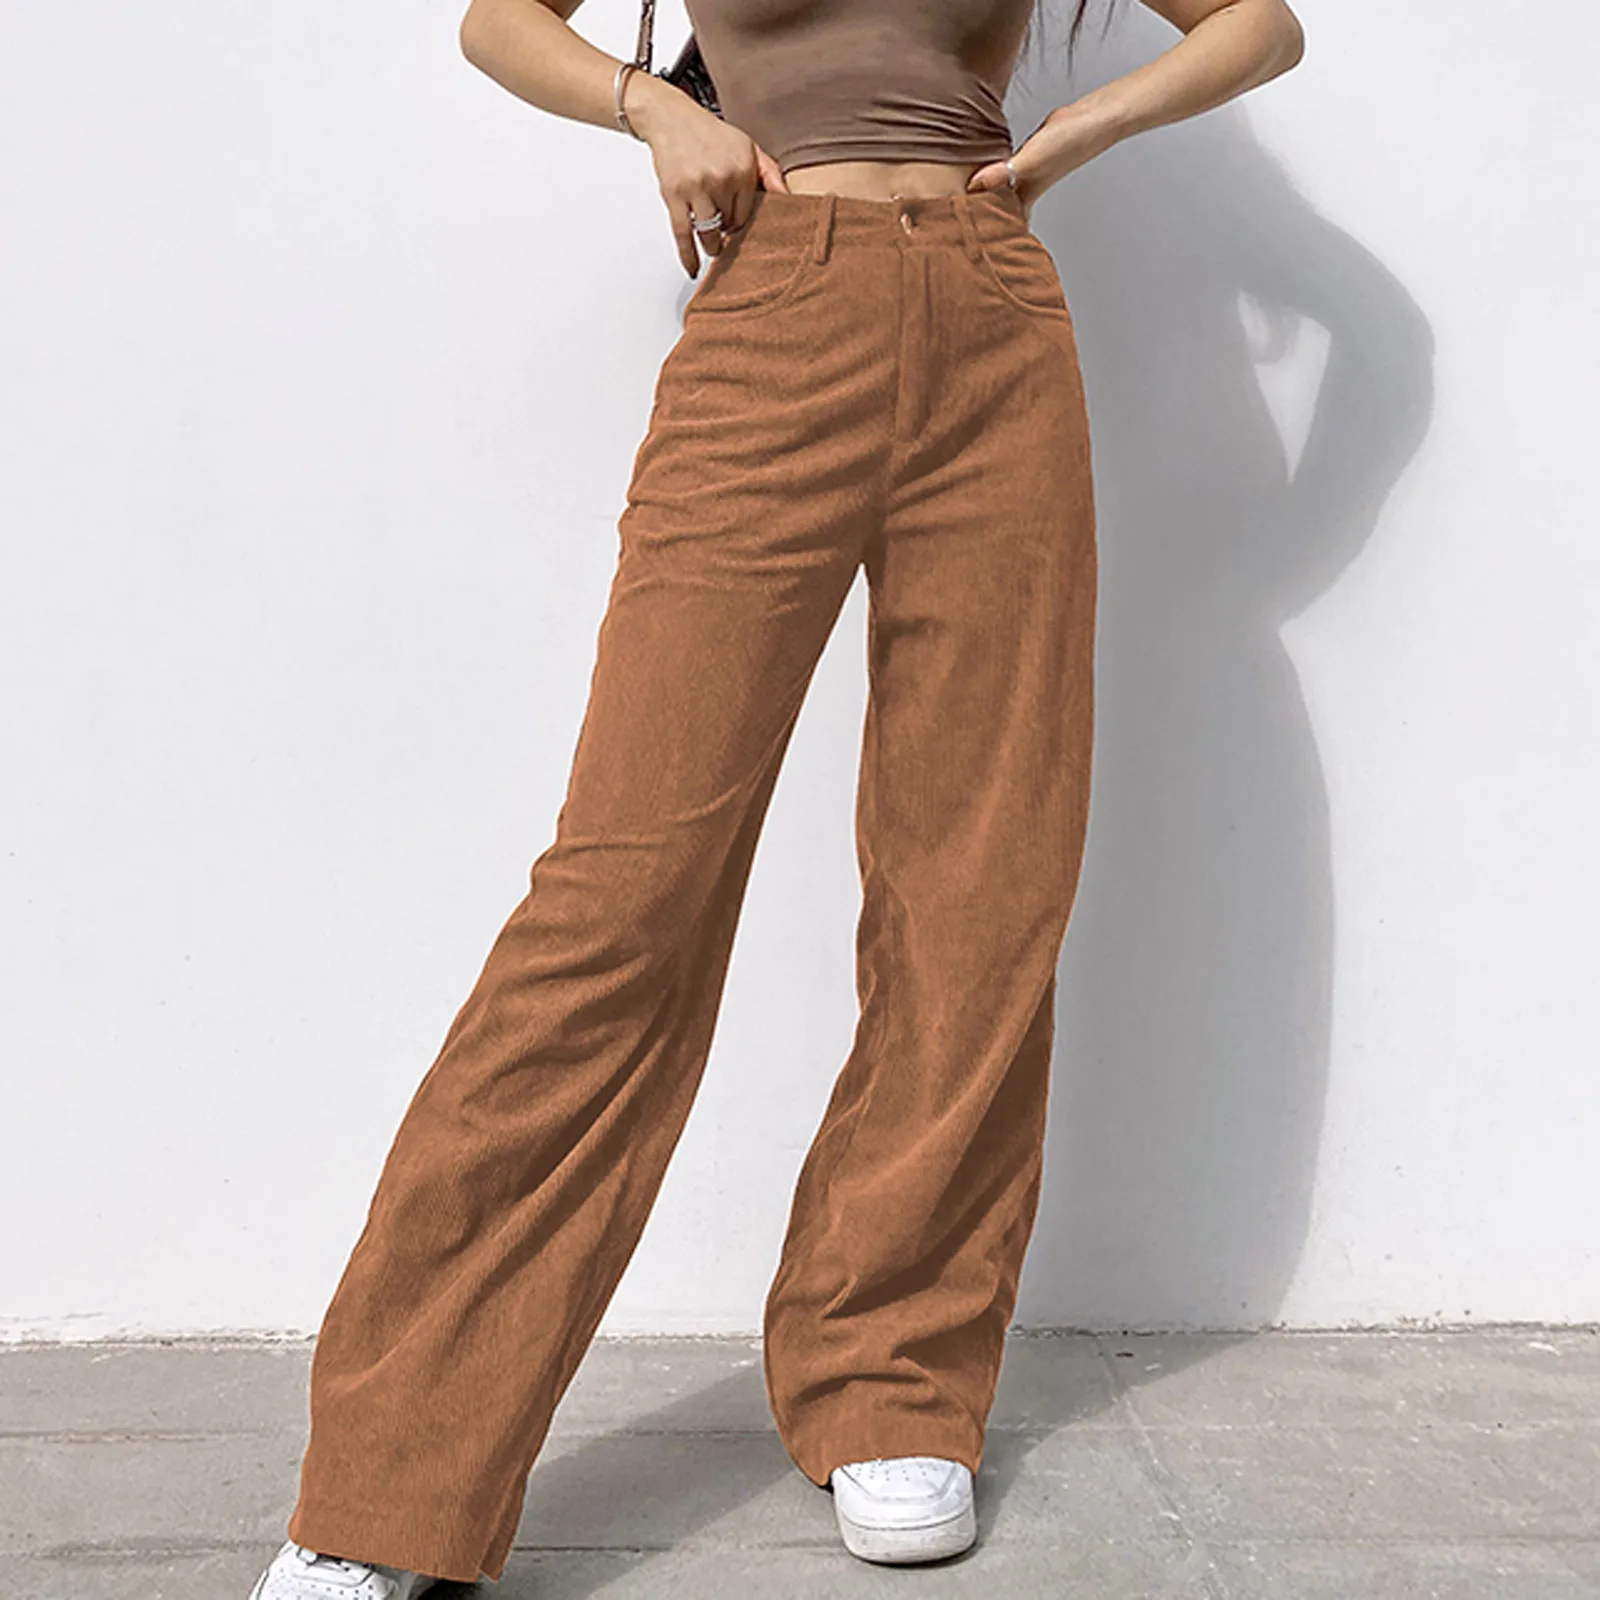 Women's Fashion Jeans Women’s Solid Mid Waisted Wide Leg Pants Straight Casual Baggy Trousers Vintage Streetwear Mom |